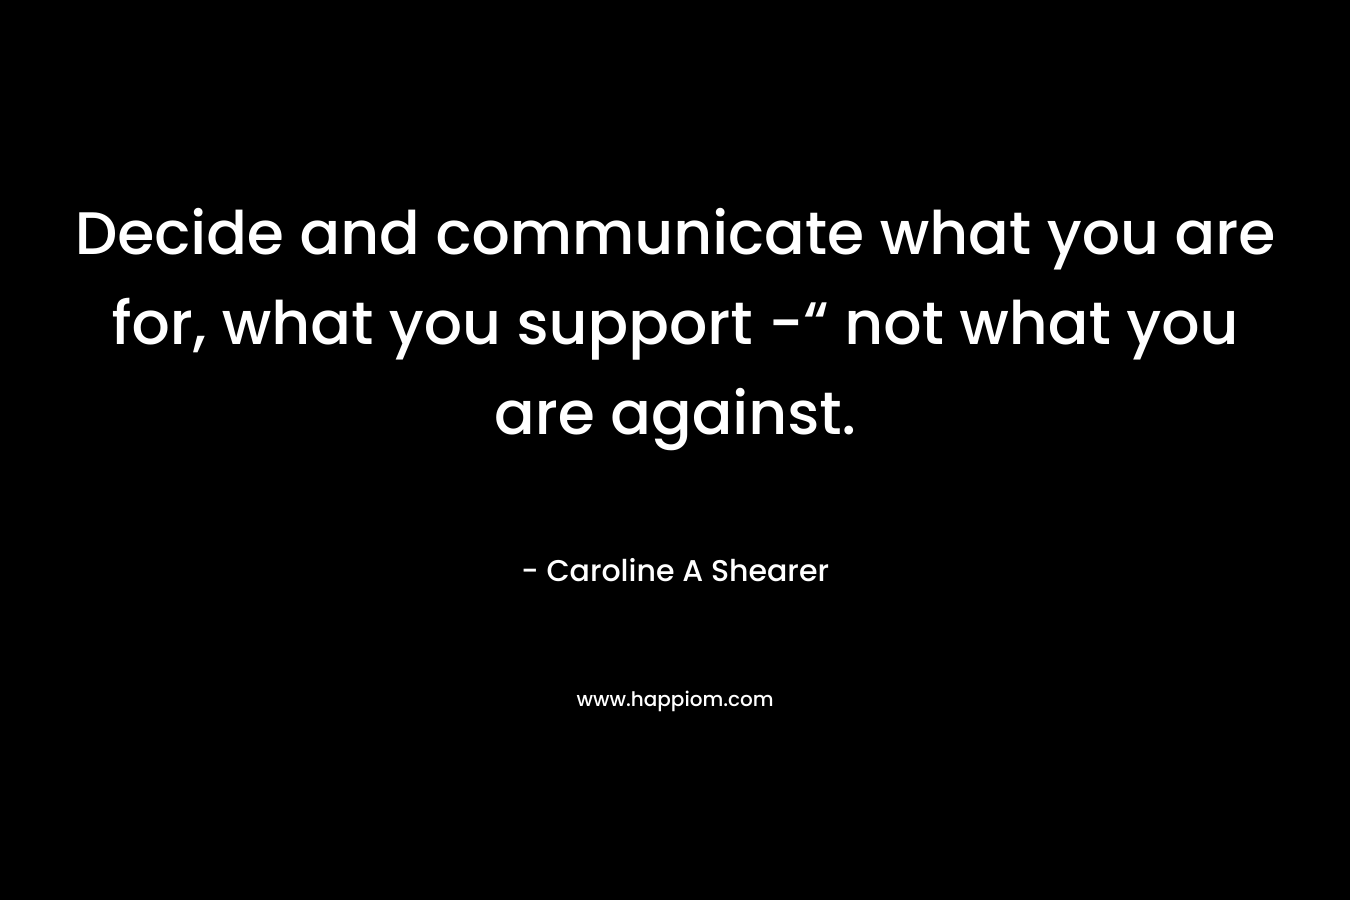 Decide and communicate what you are for, what you support -“ not what you are against.